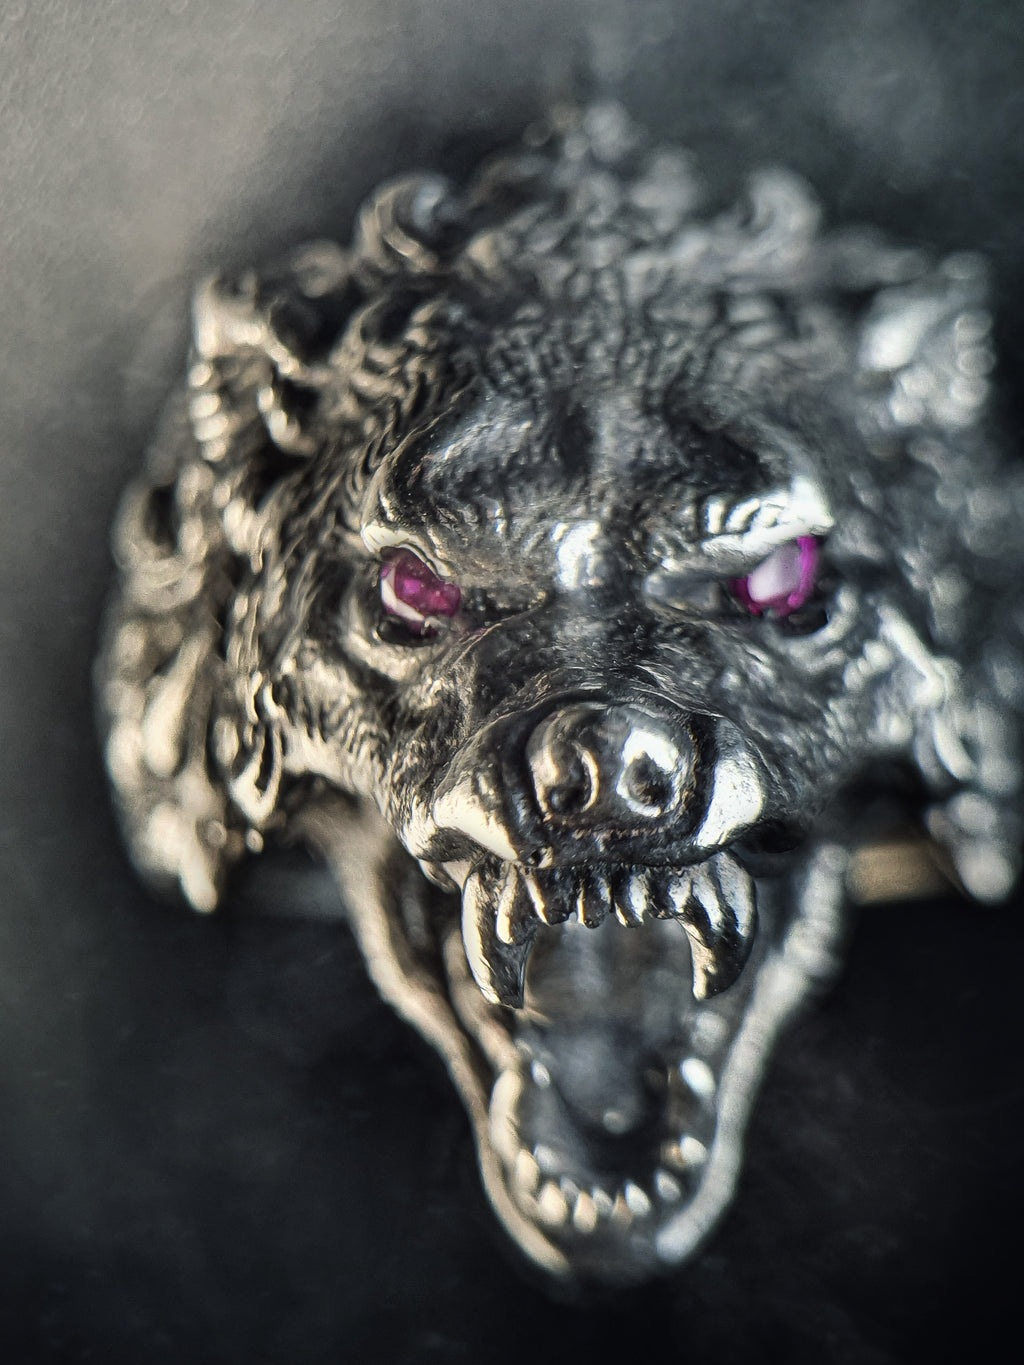 Wolf Ring | 925 Silver